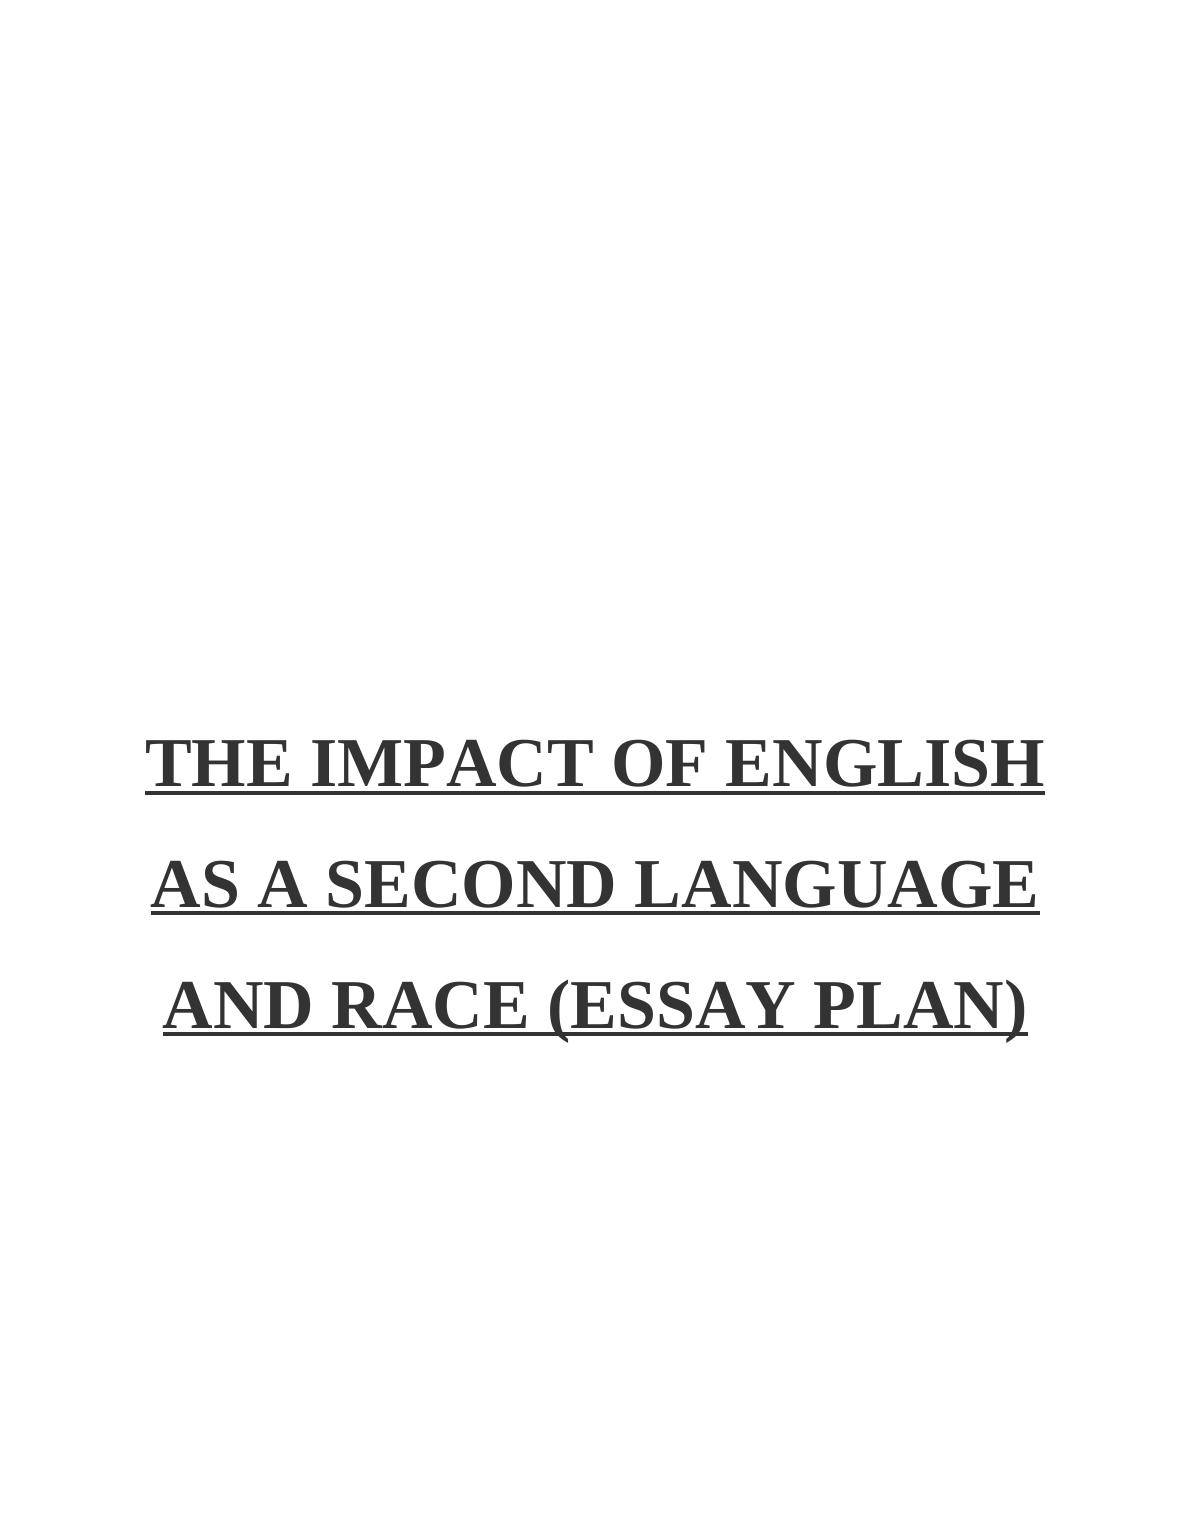 The Impact of English as a Second Language and Race (Essay Plan)_1